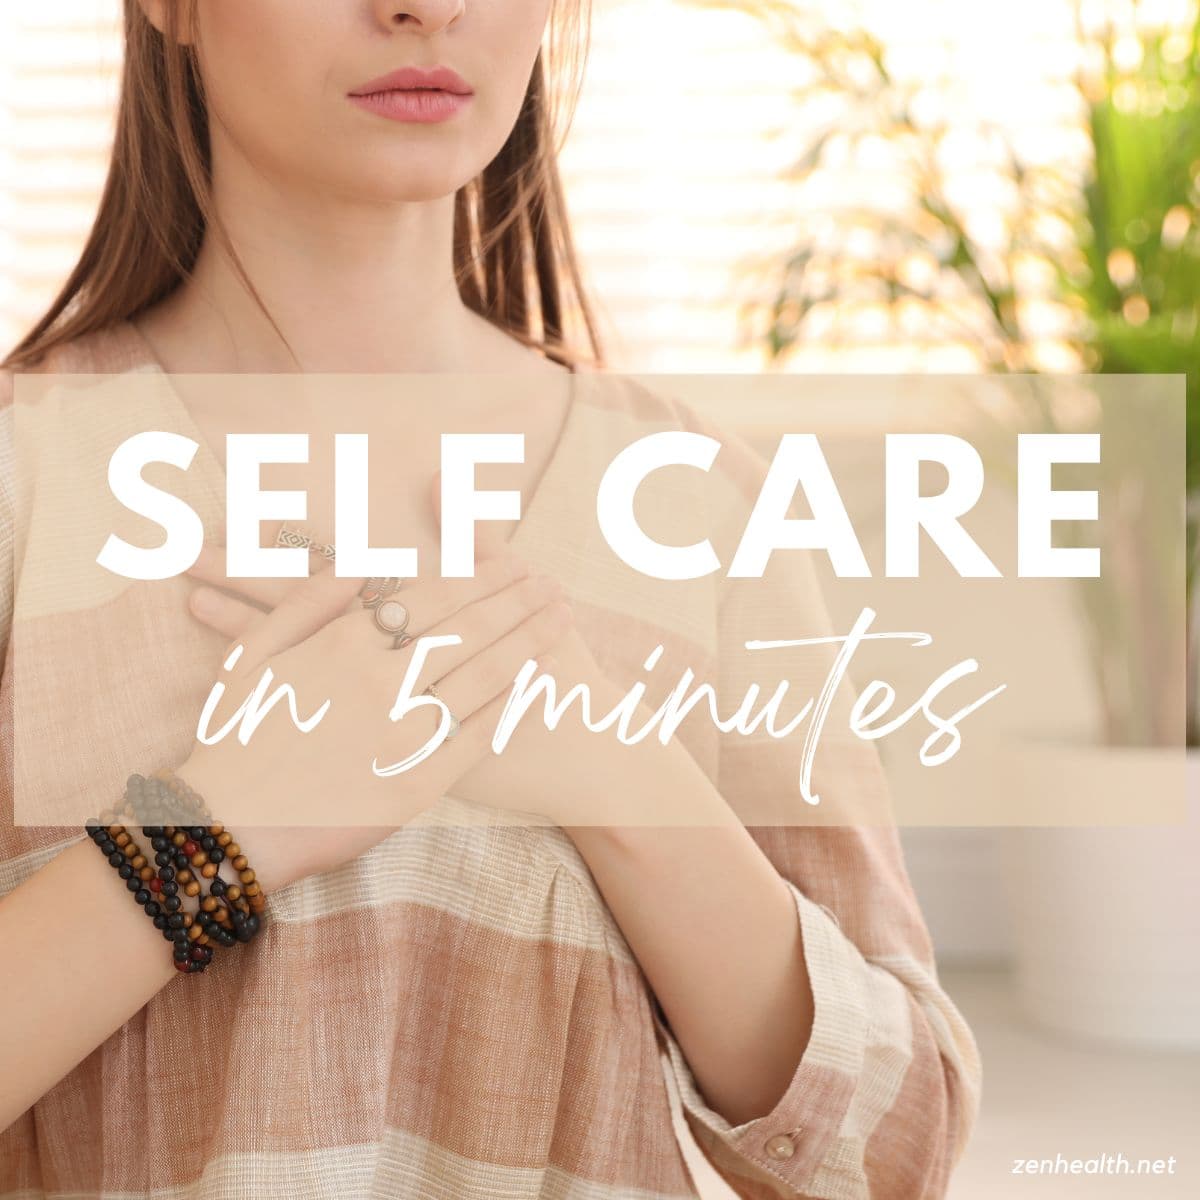 5 Minute Self Care: Try These 30 Ideas for Wellness